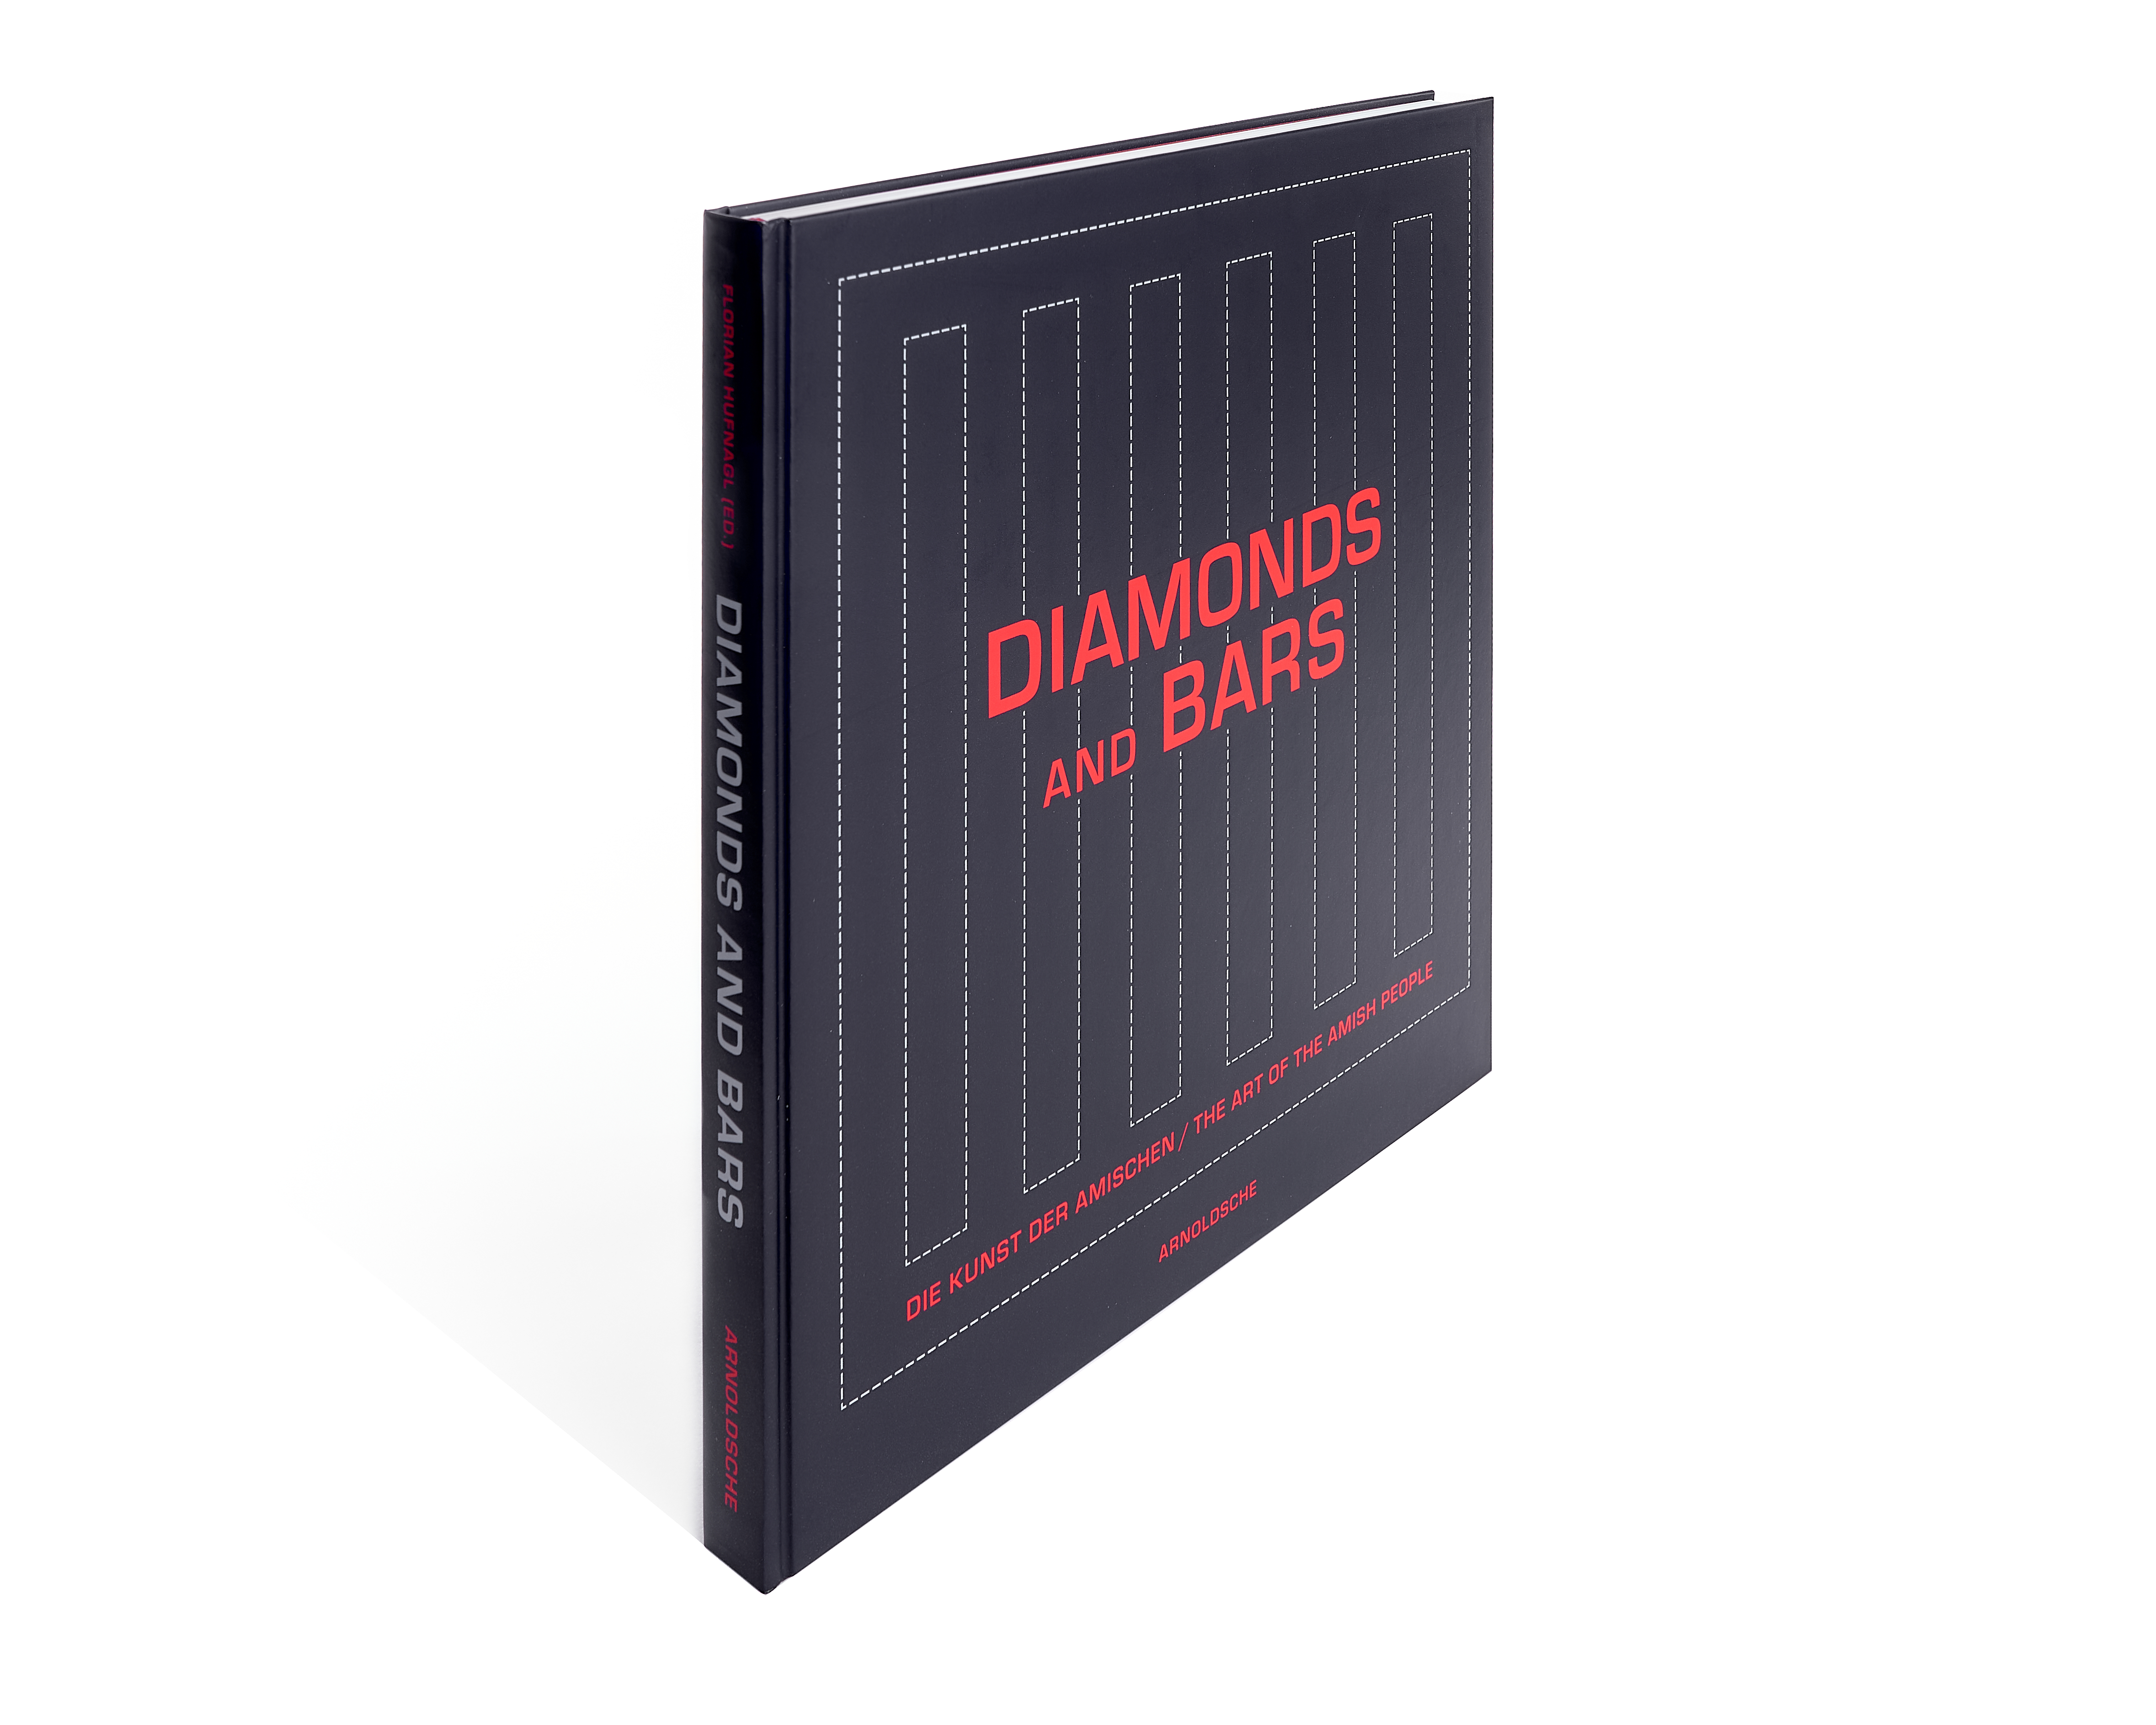 Diamonds and Bars. Die Kunst der Amischen / The Art of the Amish People